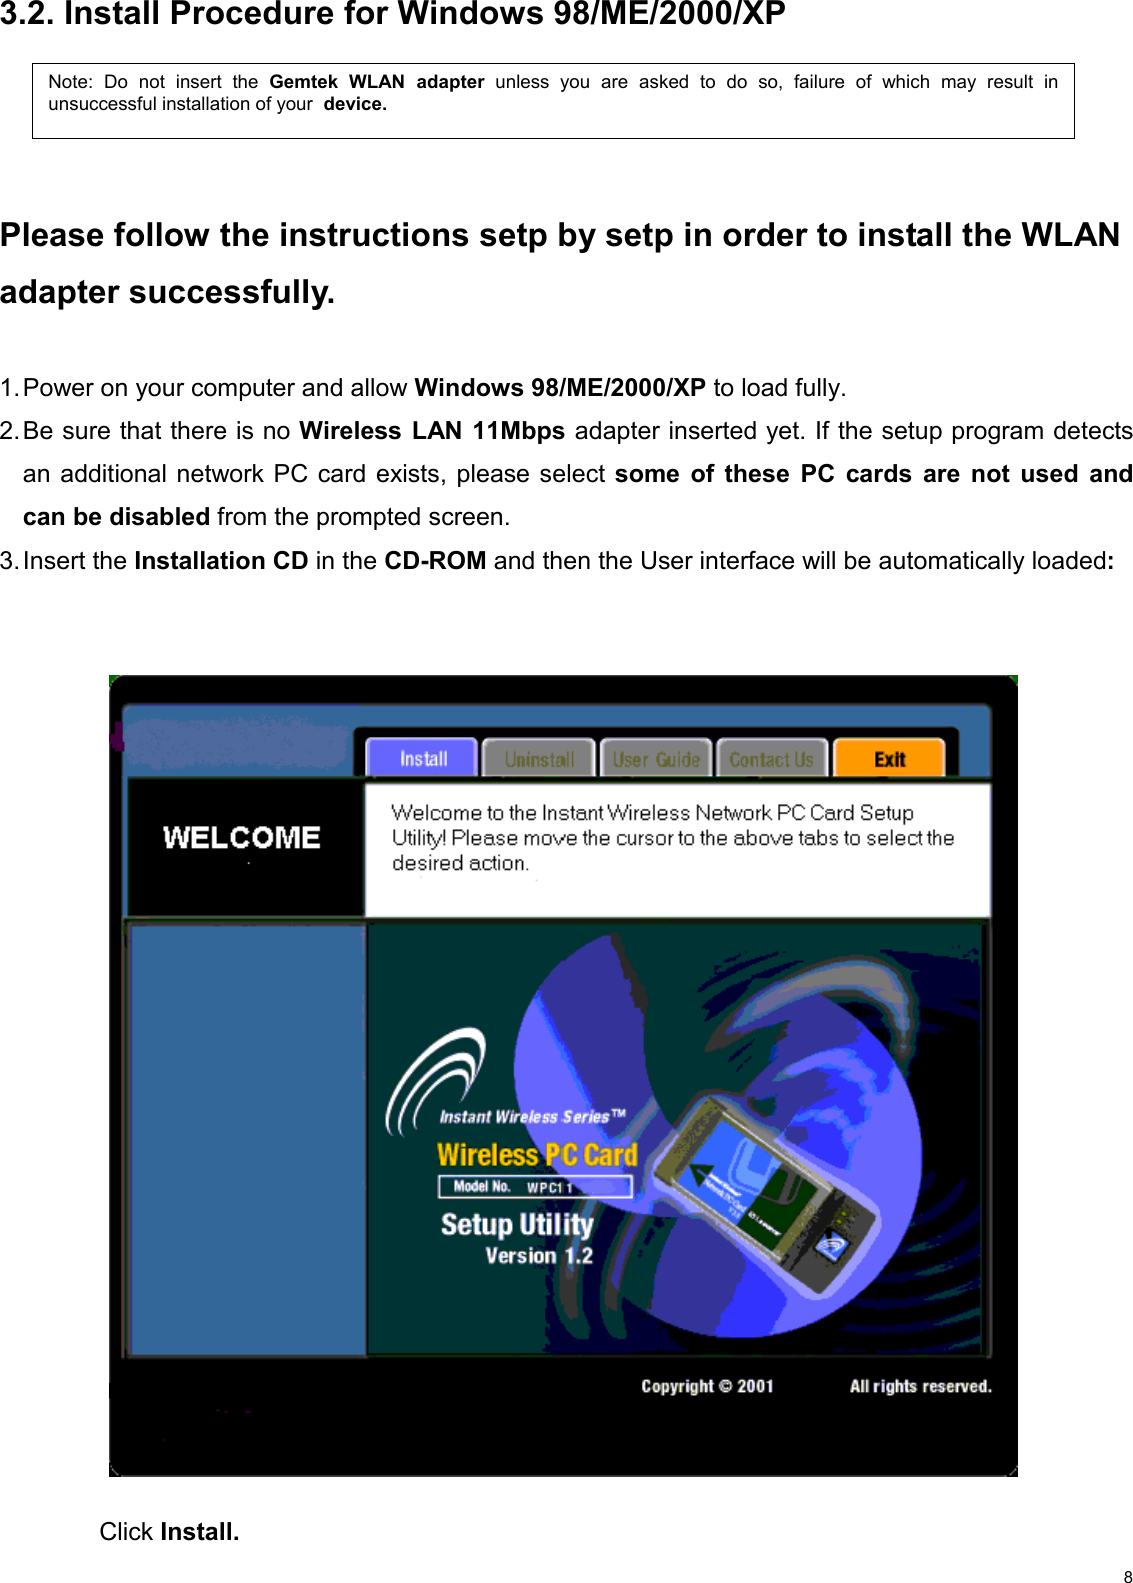   83.2. Install Procedure for Windows 98/ME/2000/XP    Please follow the instructions setp by setp in order to install the WLAN adapter successfully.  1. Power on your computer and allow Windows 98/ME/2000/XP to load fully. 2. Be sure that there is no Wireless LAN 11Mbps adapter inserted yet. If the setup program detects an additional network PC card exists, please select some of these PC cards are not used and can be disabled from the prompted screen. 3. Insert  the  Installation CD in the CD-ROM and then the User interface will be automatically loaded:                                         Click Install.  Note: Do not insert the Gemtek WLAN adapterunless you are asked to do so, failure of which may result inunsuccessful installation of your  device. 